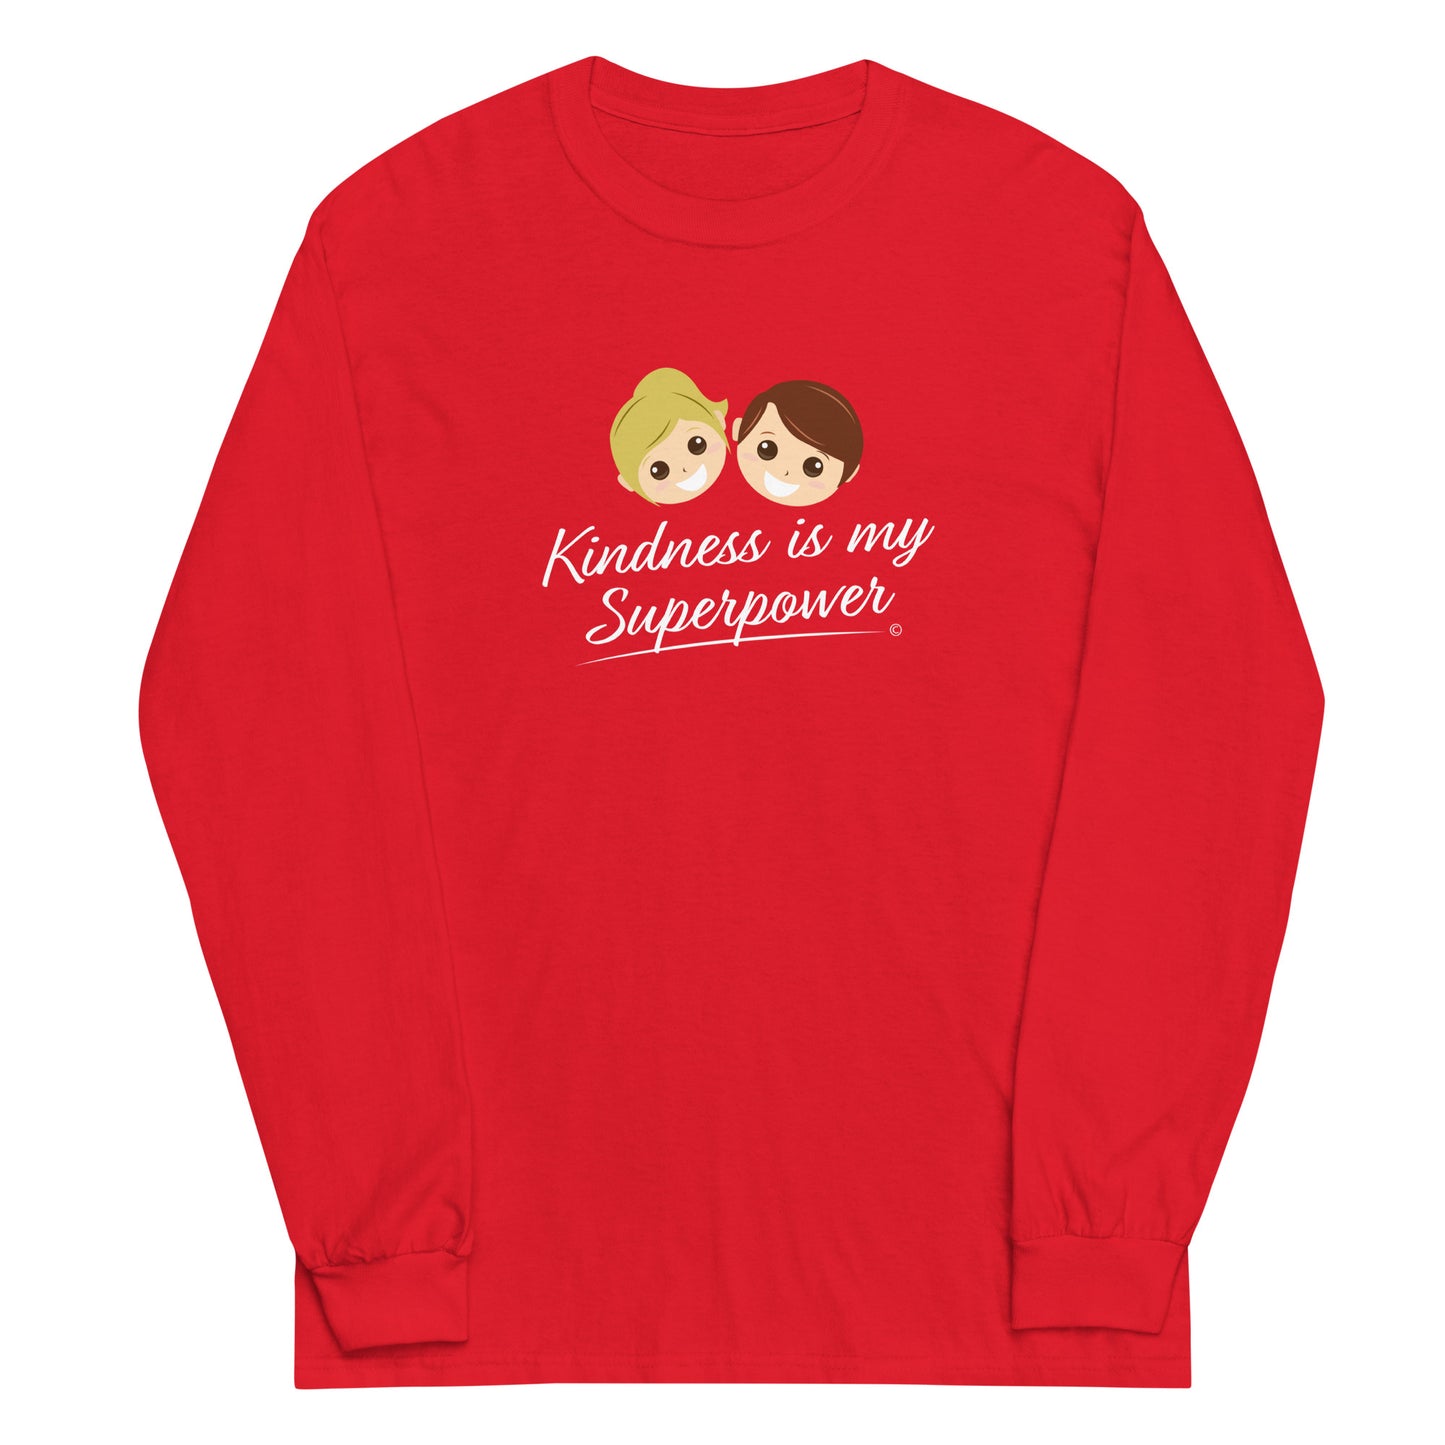 A stylish long sleeve shirt in red featuring the empowering quote 'Kindness is my Superpower' in bold lettering.